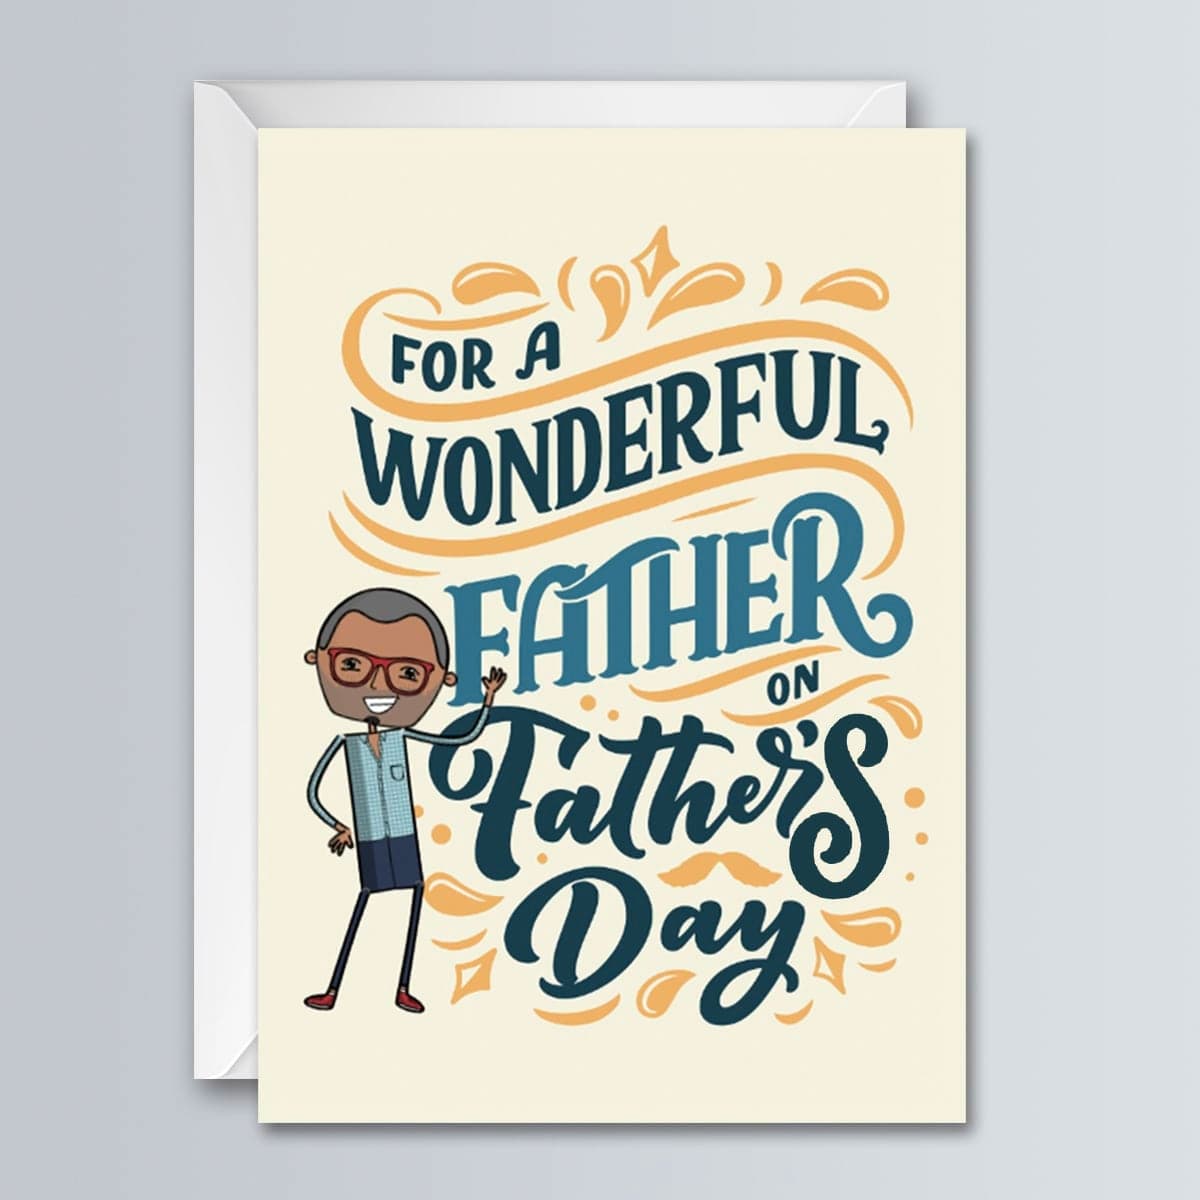 Wonderful Father on Father's Day - Greeting Card